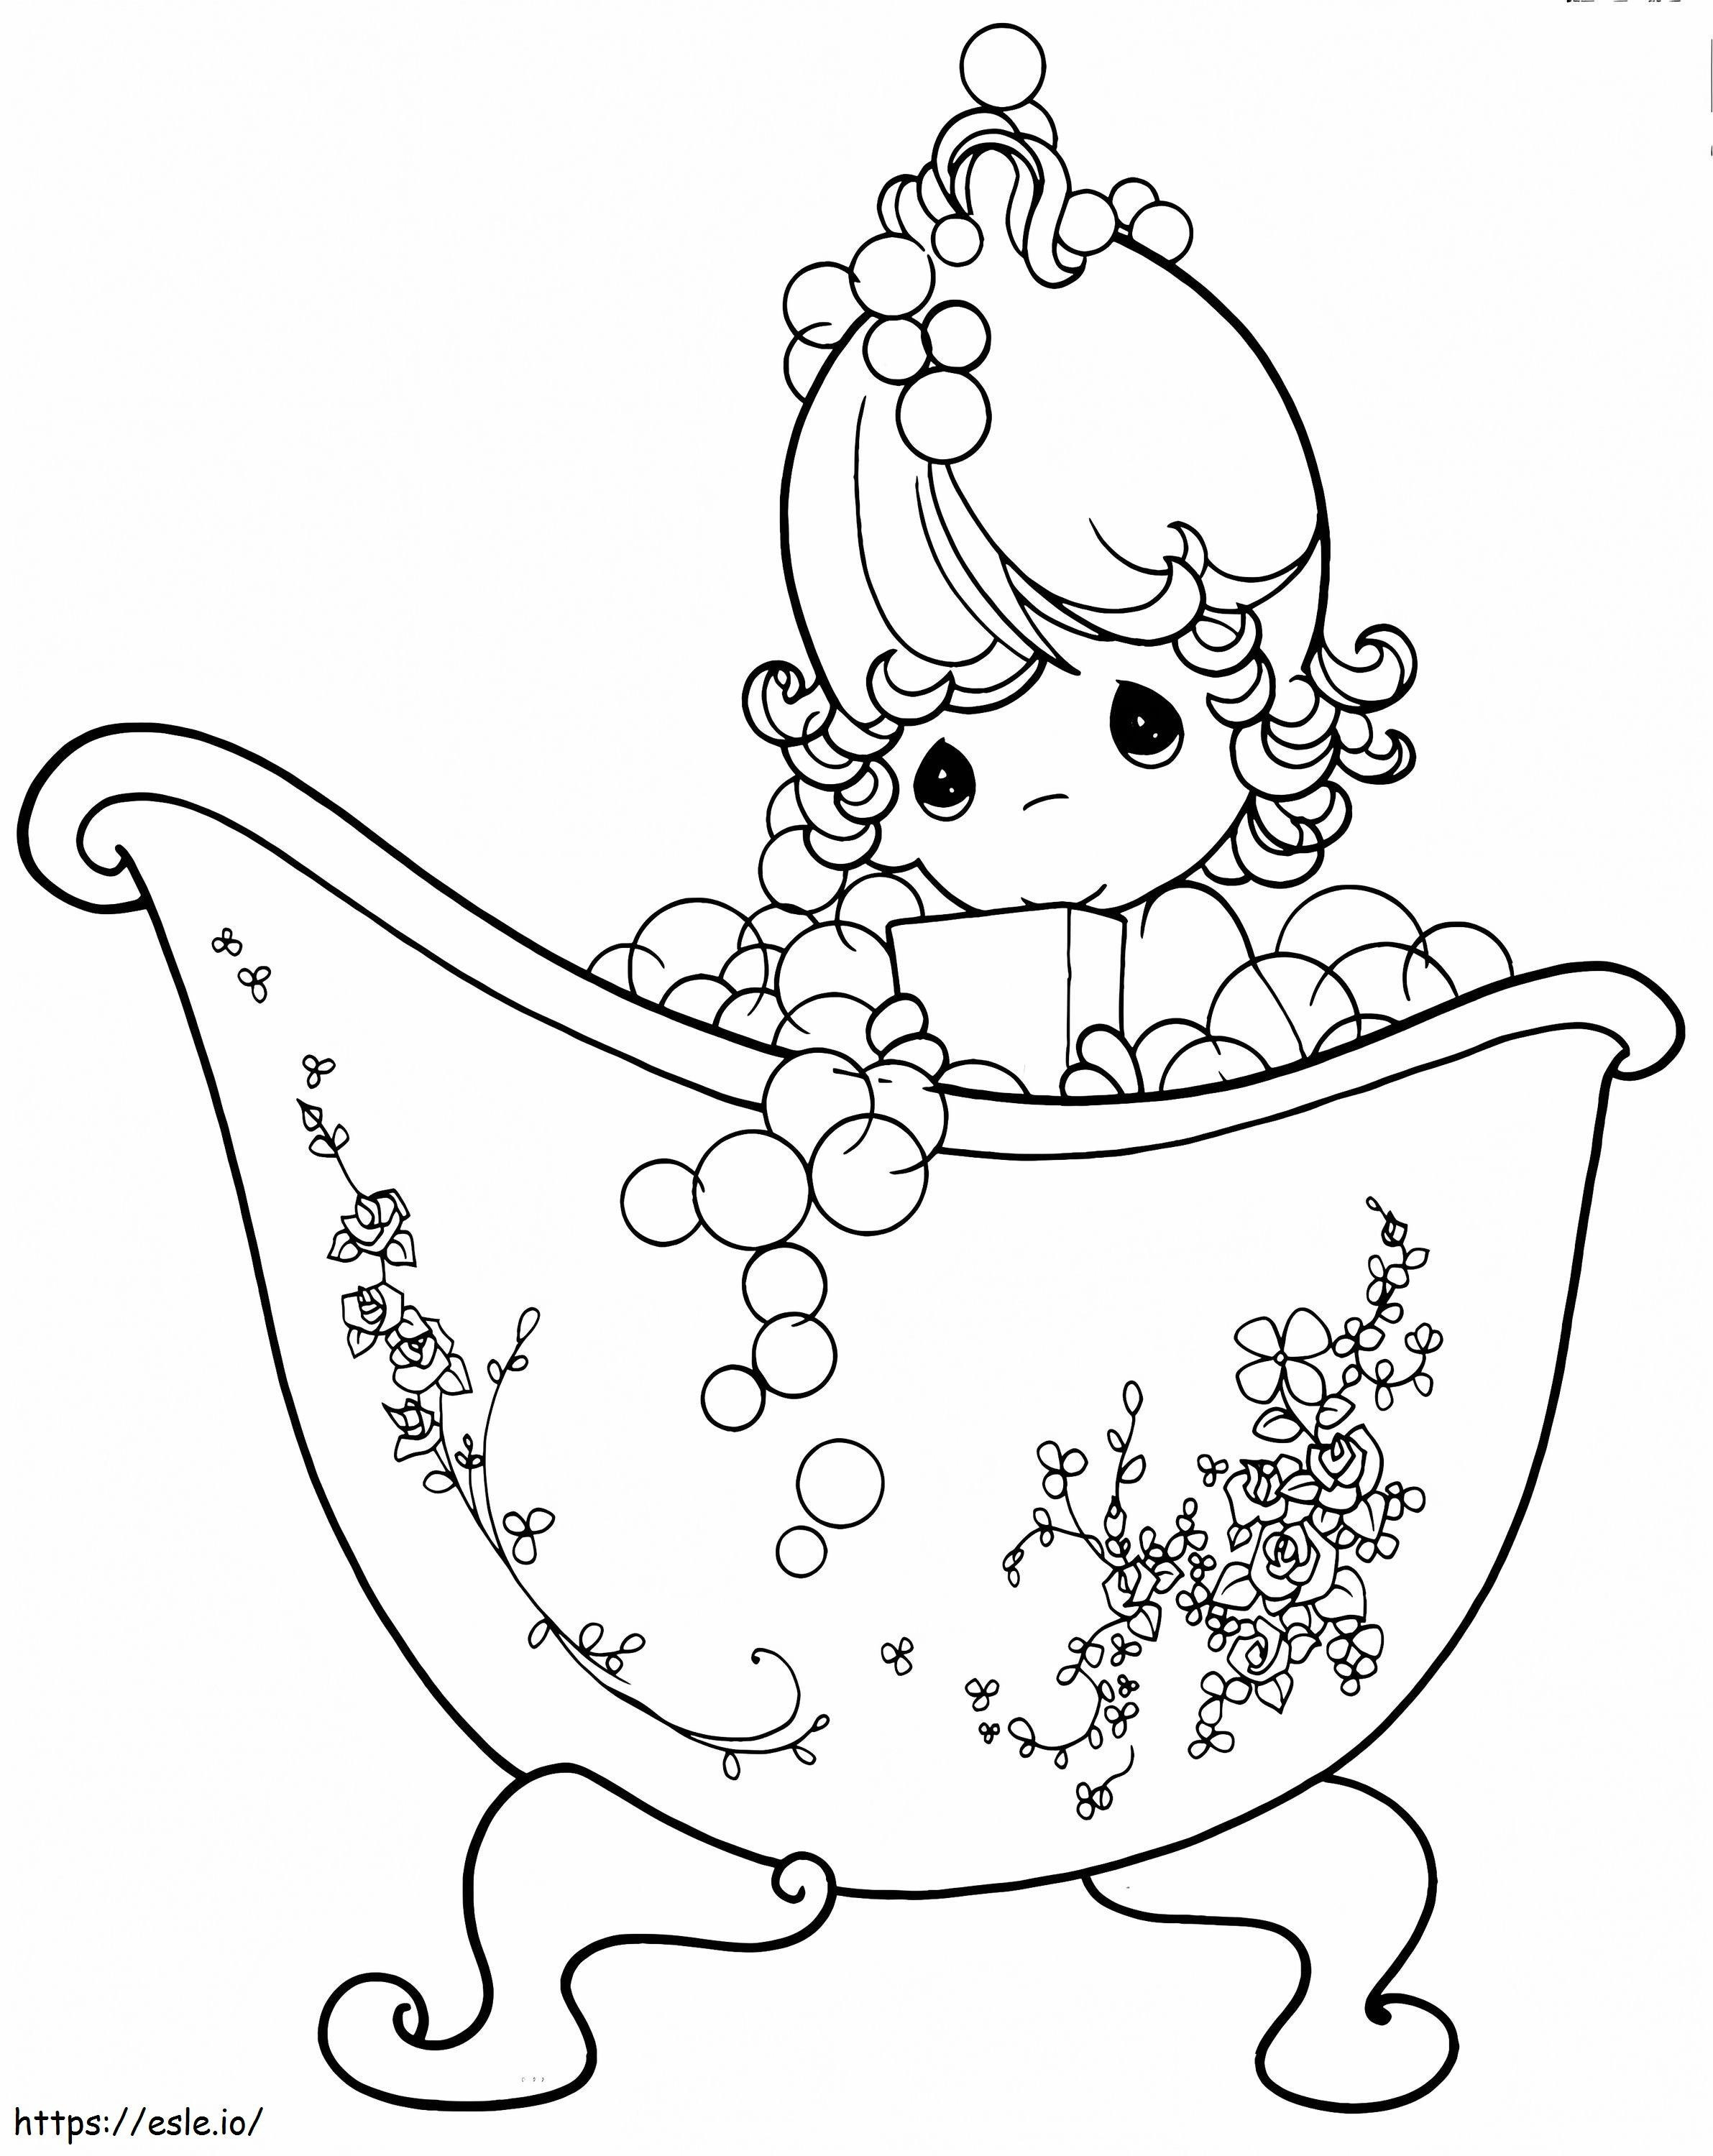 1574210667 Extraordinary Precious Momentsing Picture Inspirations Black Pictures Pages All Book coloring page